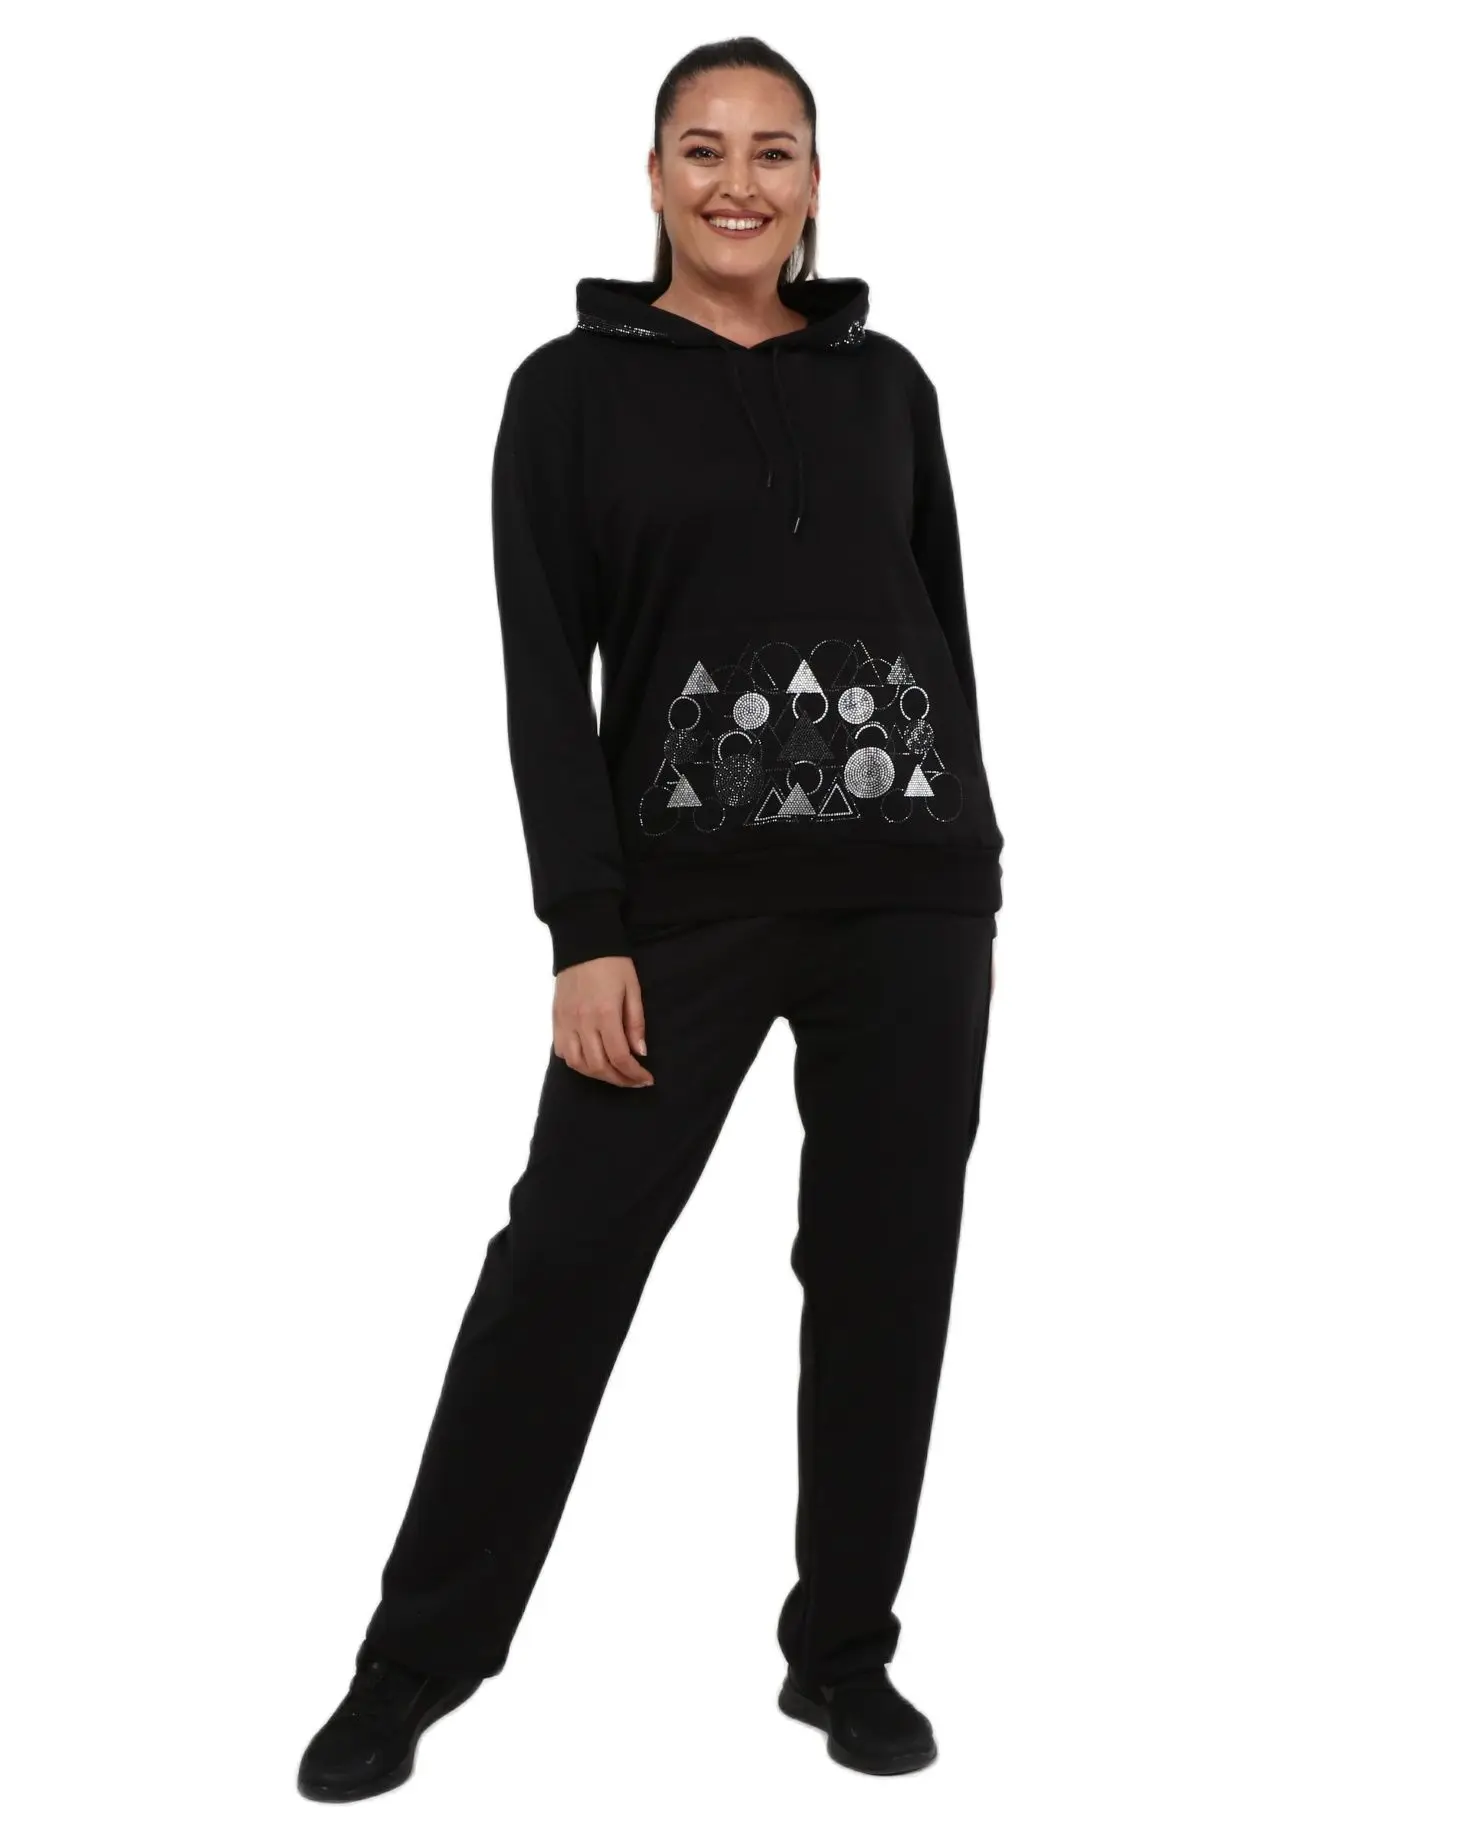 Women’s Plus Size Black Sweatsuit Set 2 Piece Geometric Stone Print Tracksuit, Designed and Made in Turkey, New Arrival